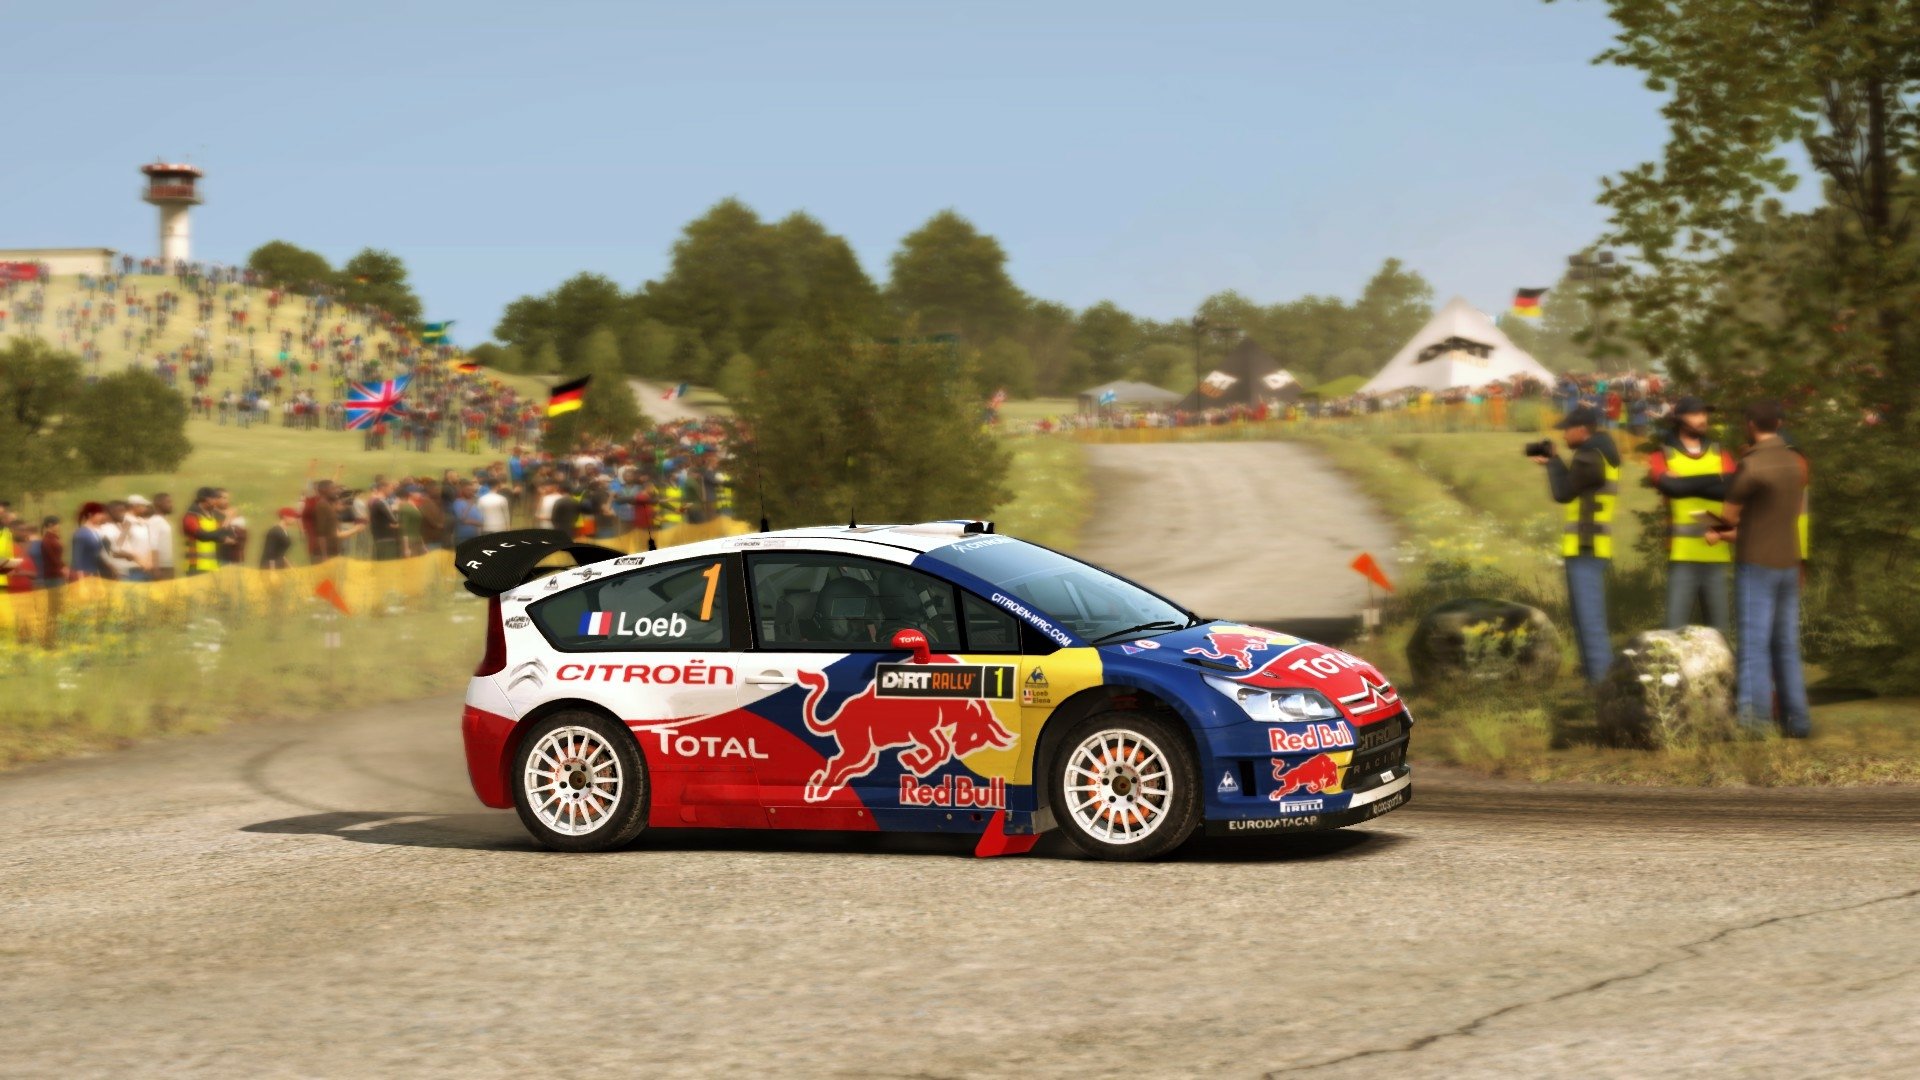 hd dirt rally backgrounds